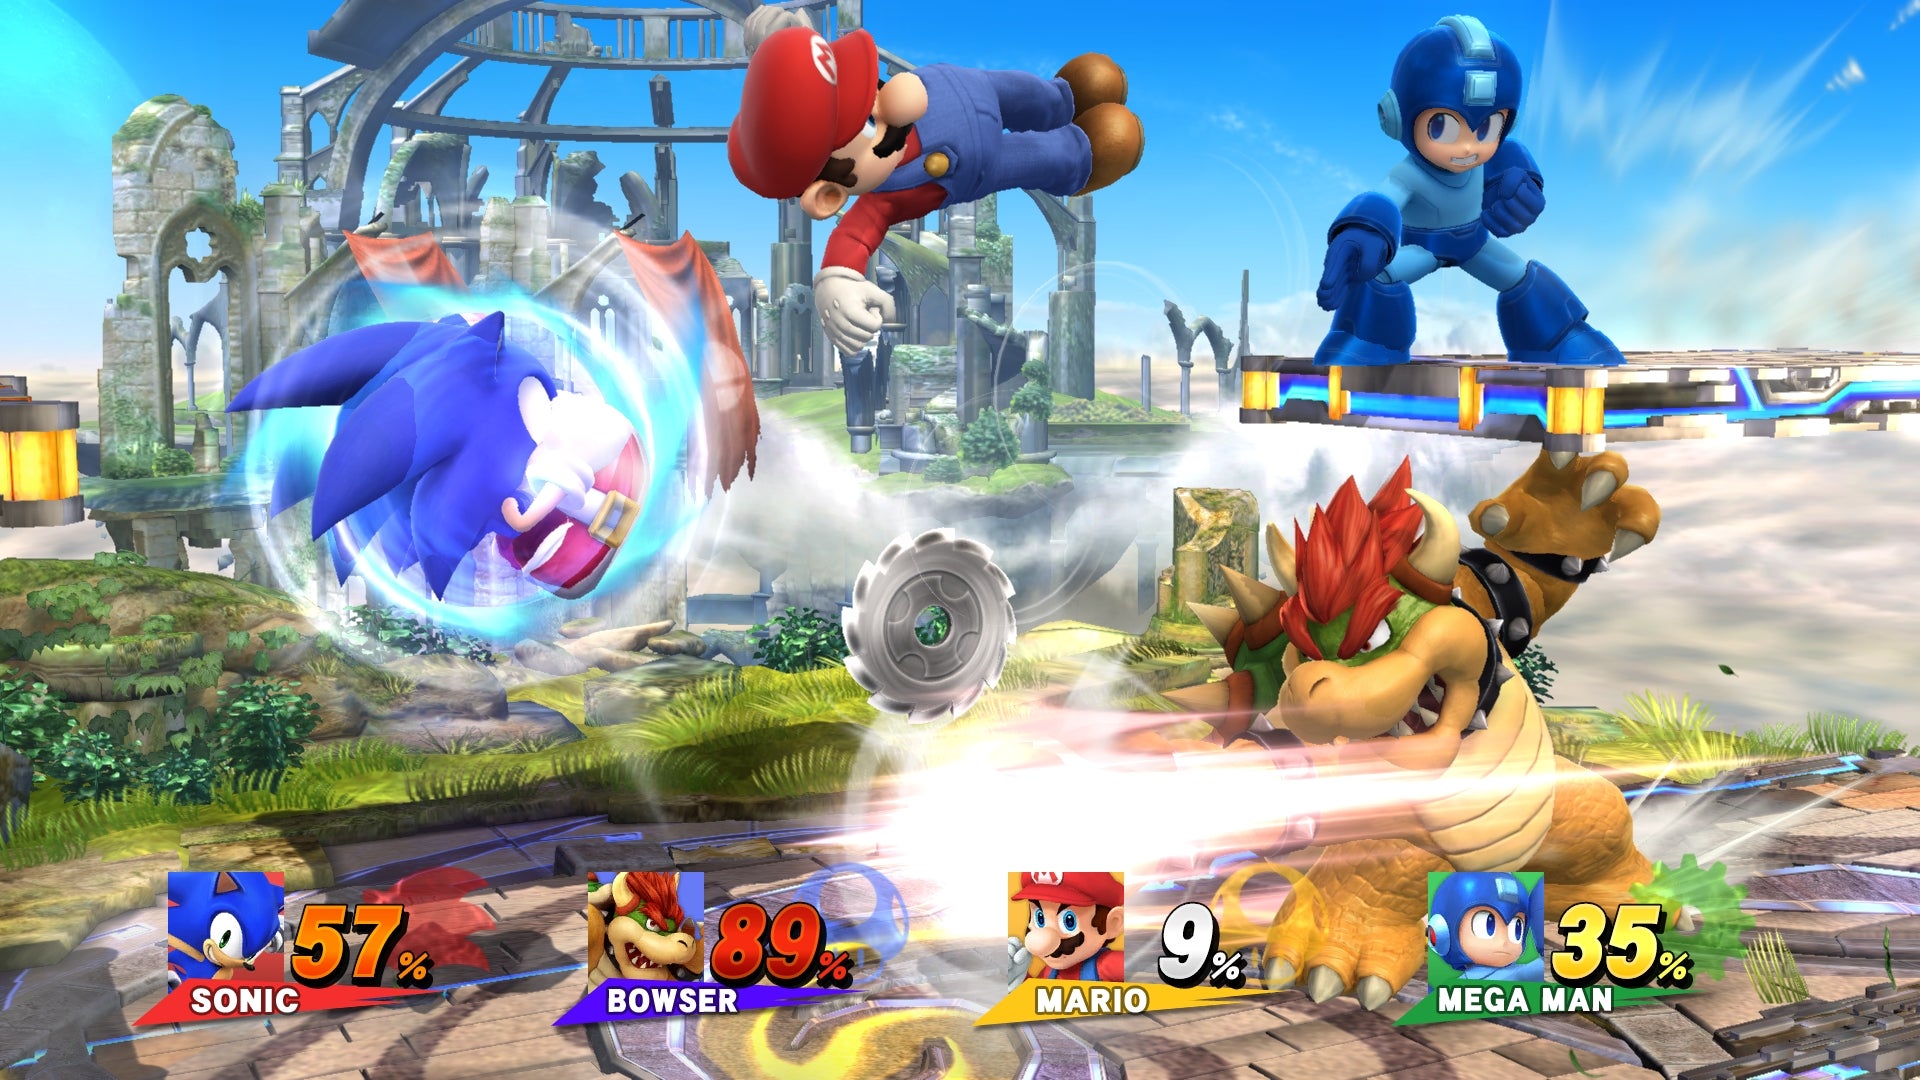 Image for Nintendo says to "avoid the rush" by pre-downloading Super Smash Bros. Wii U